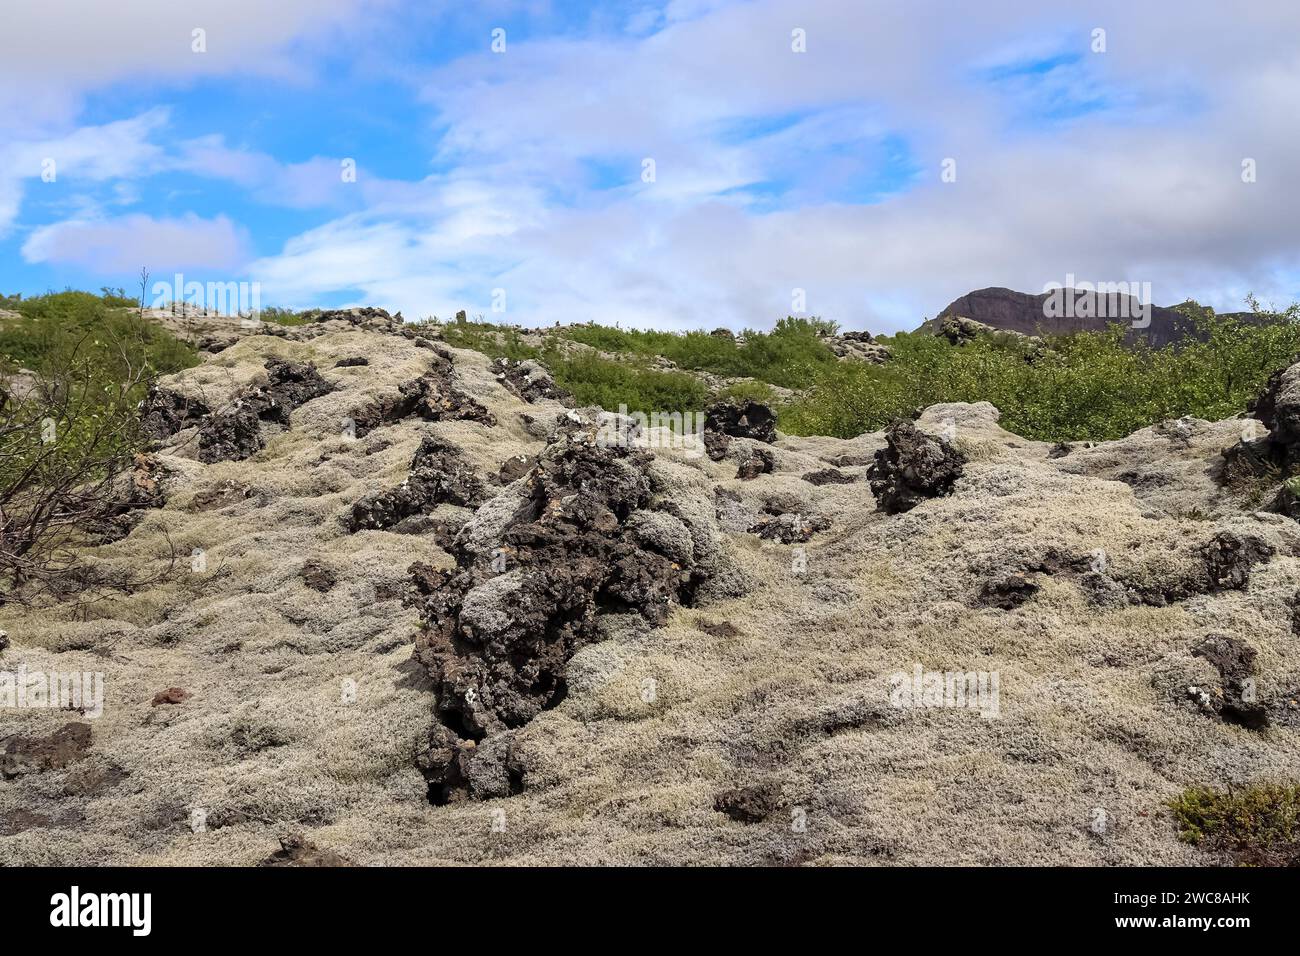 View of the lava fields of a past volcanic eruption in Iceland Stock Photo